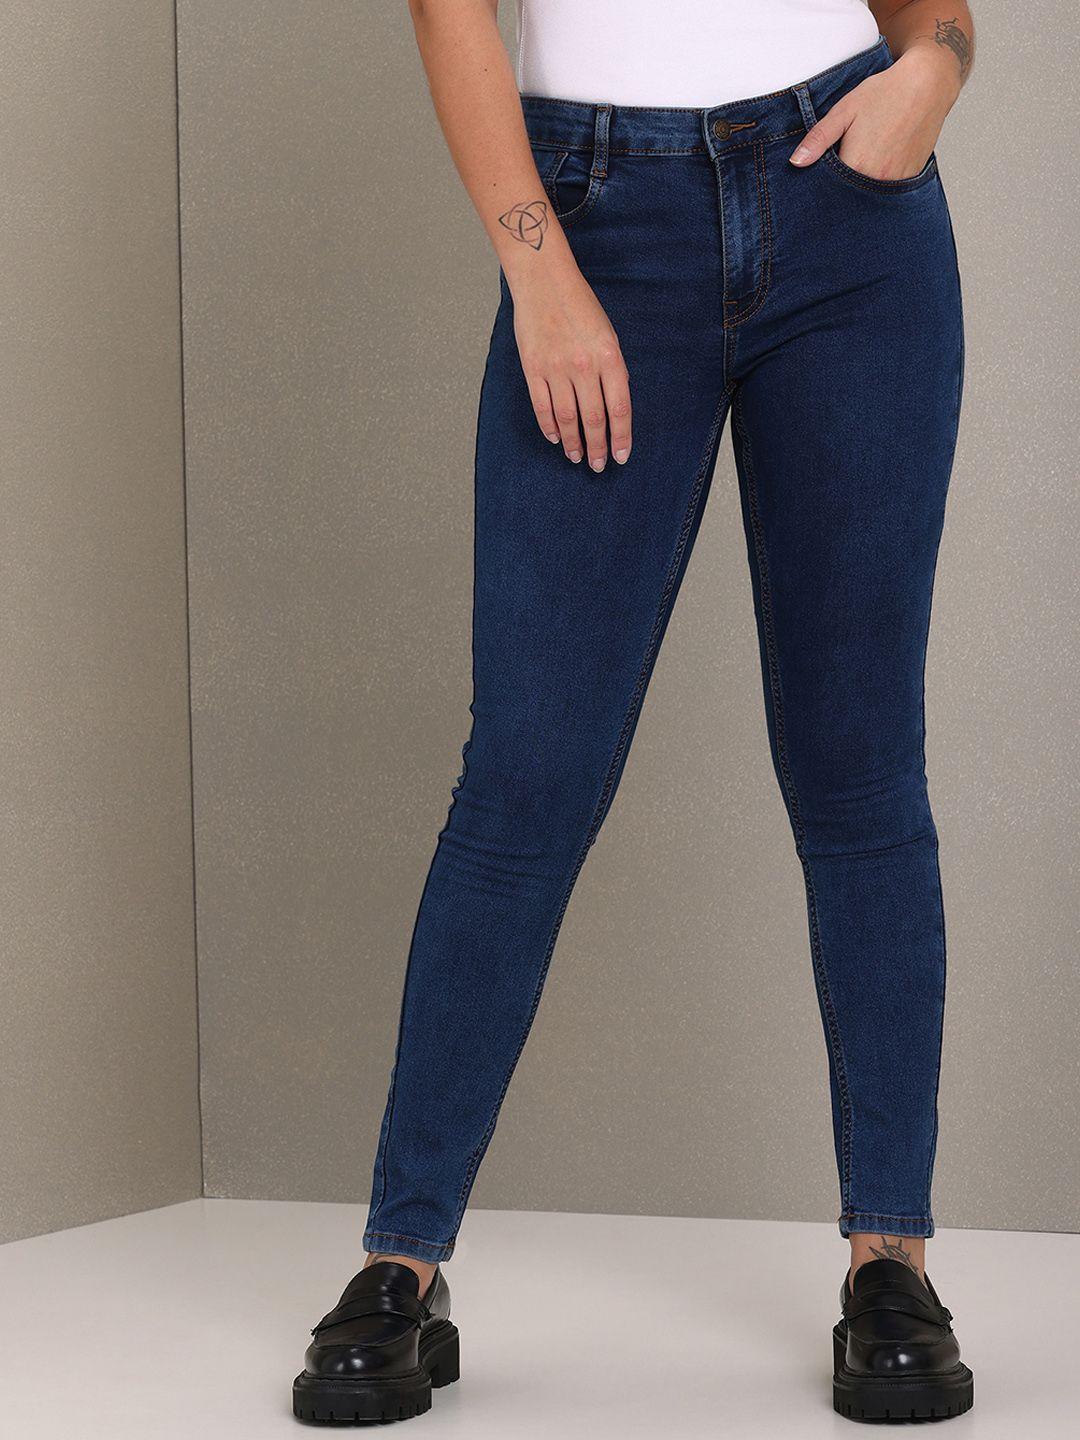 u s polo assn women navy blue skinny fit mid rise no fade stretchable jeans